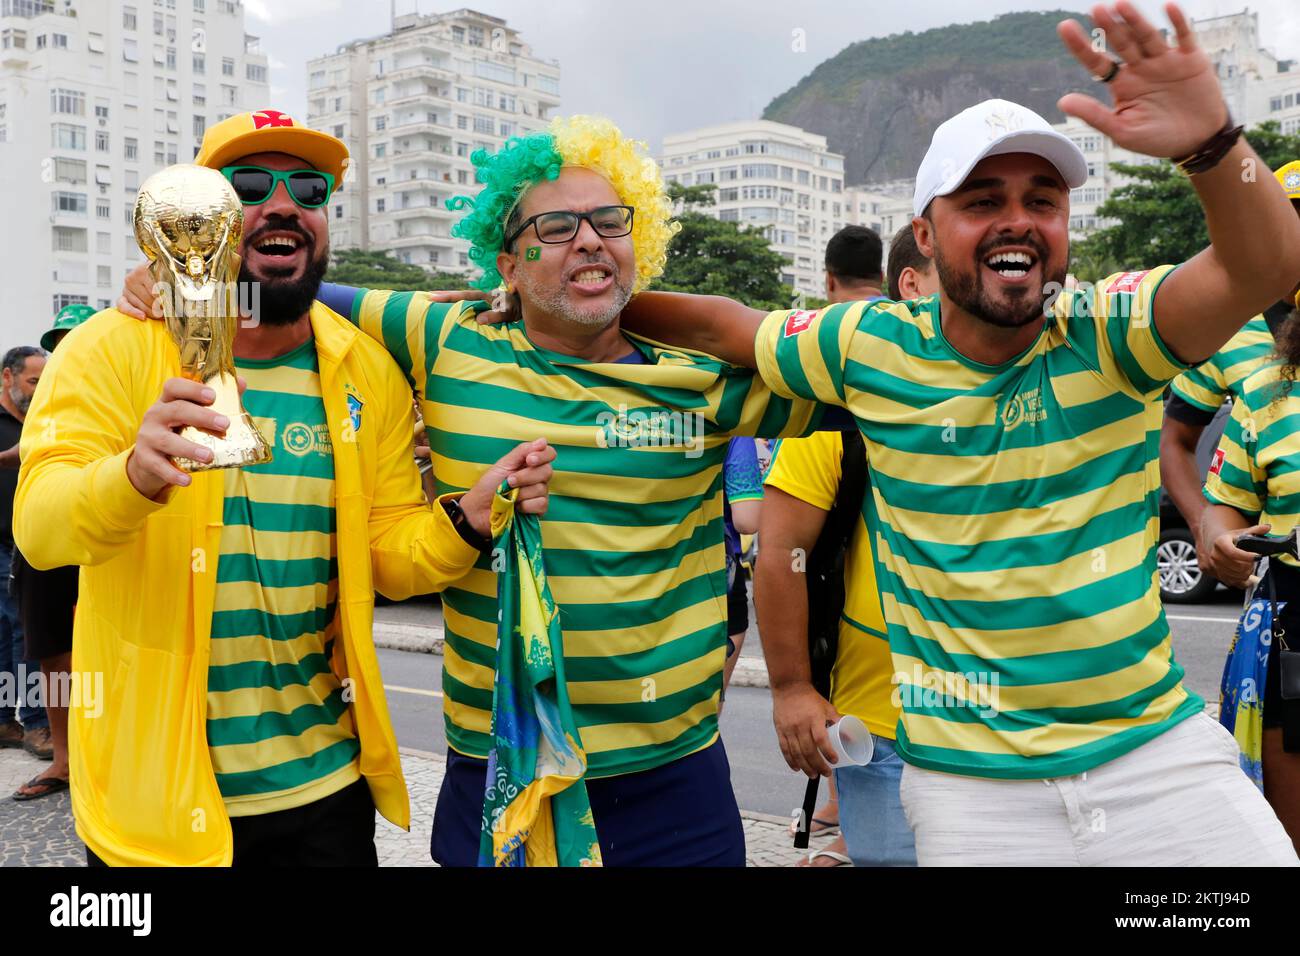 Brazilian fans gather at street party to support national soccer team playing Fifa World Cup at Fan Festival arena Stock Photo